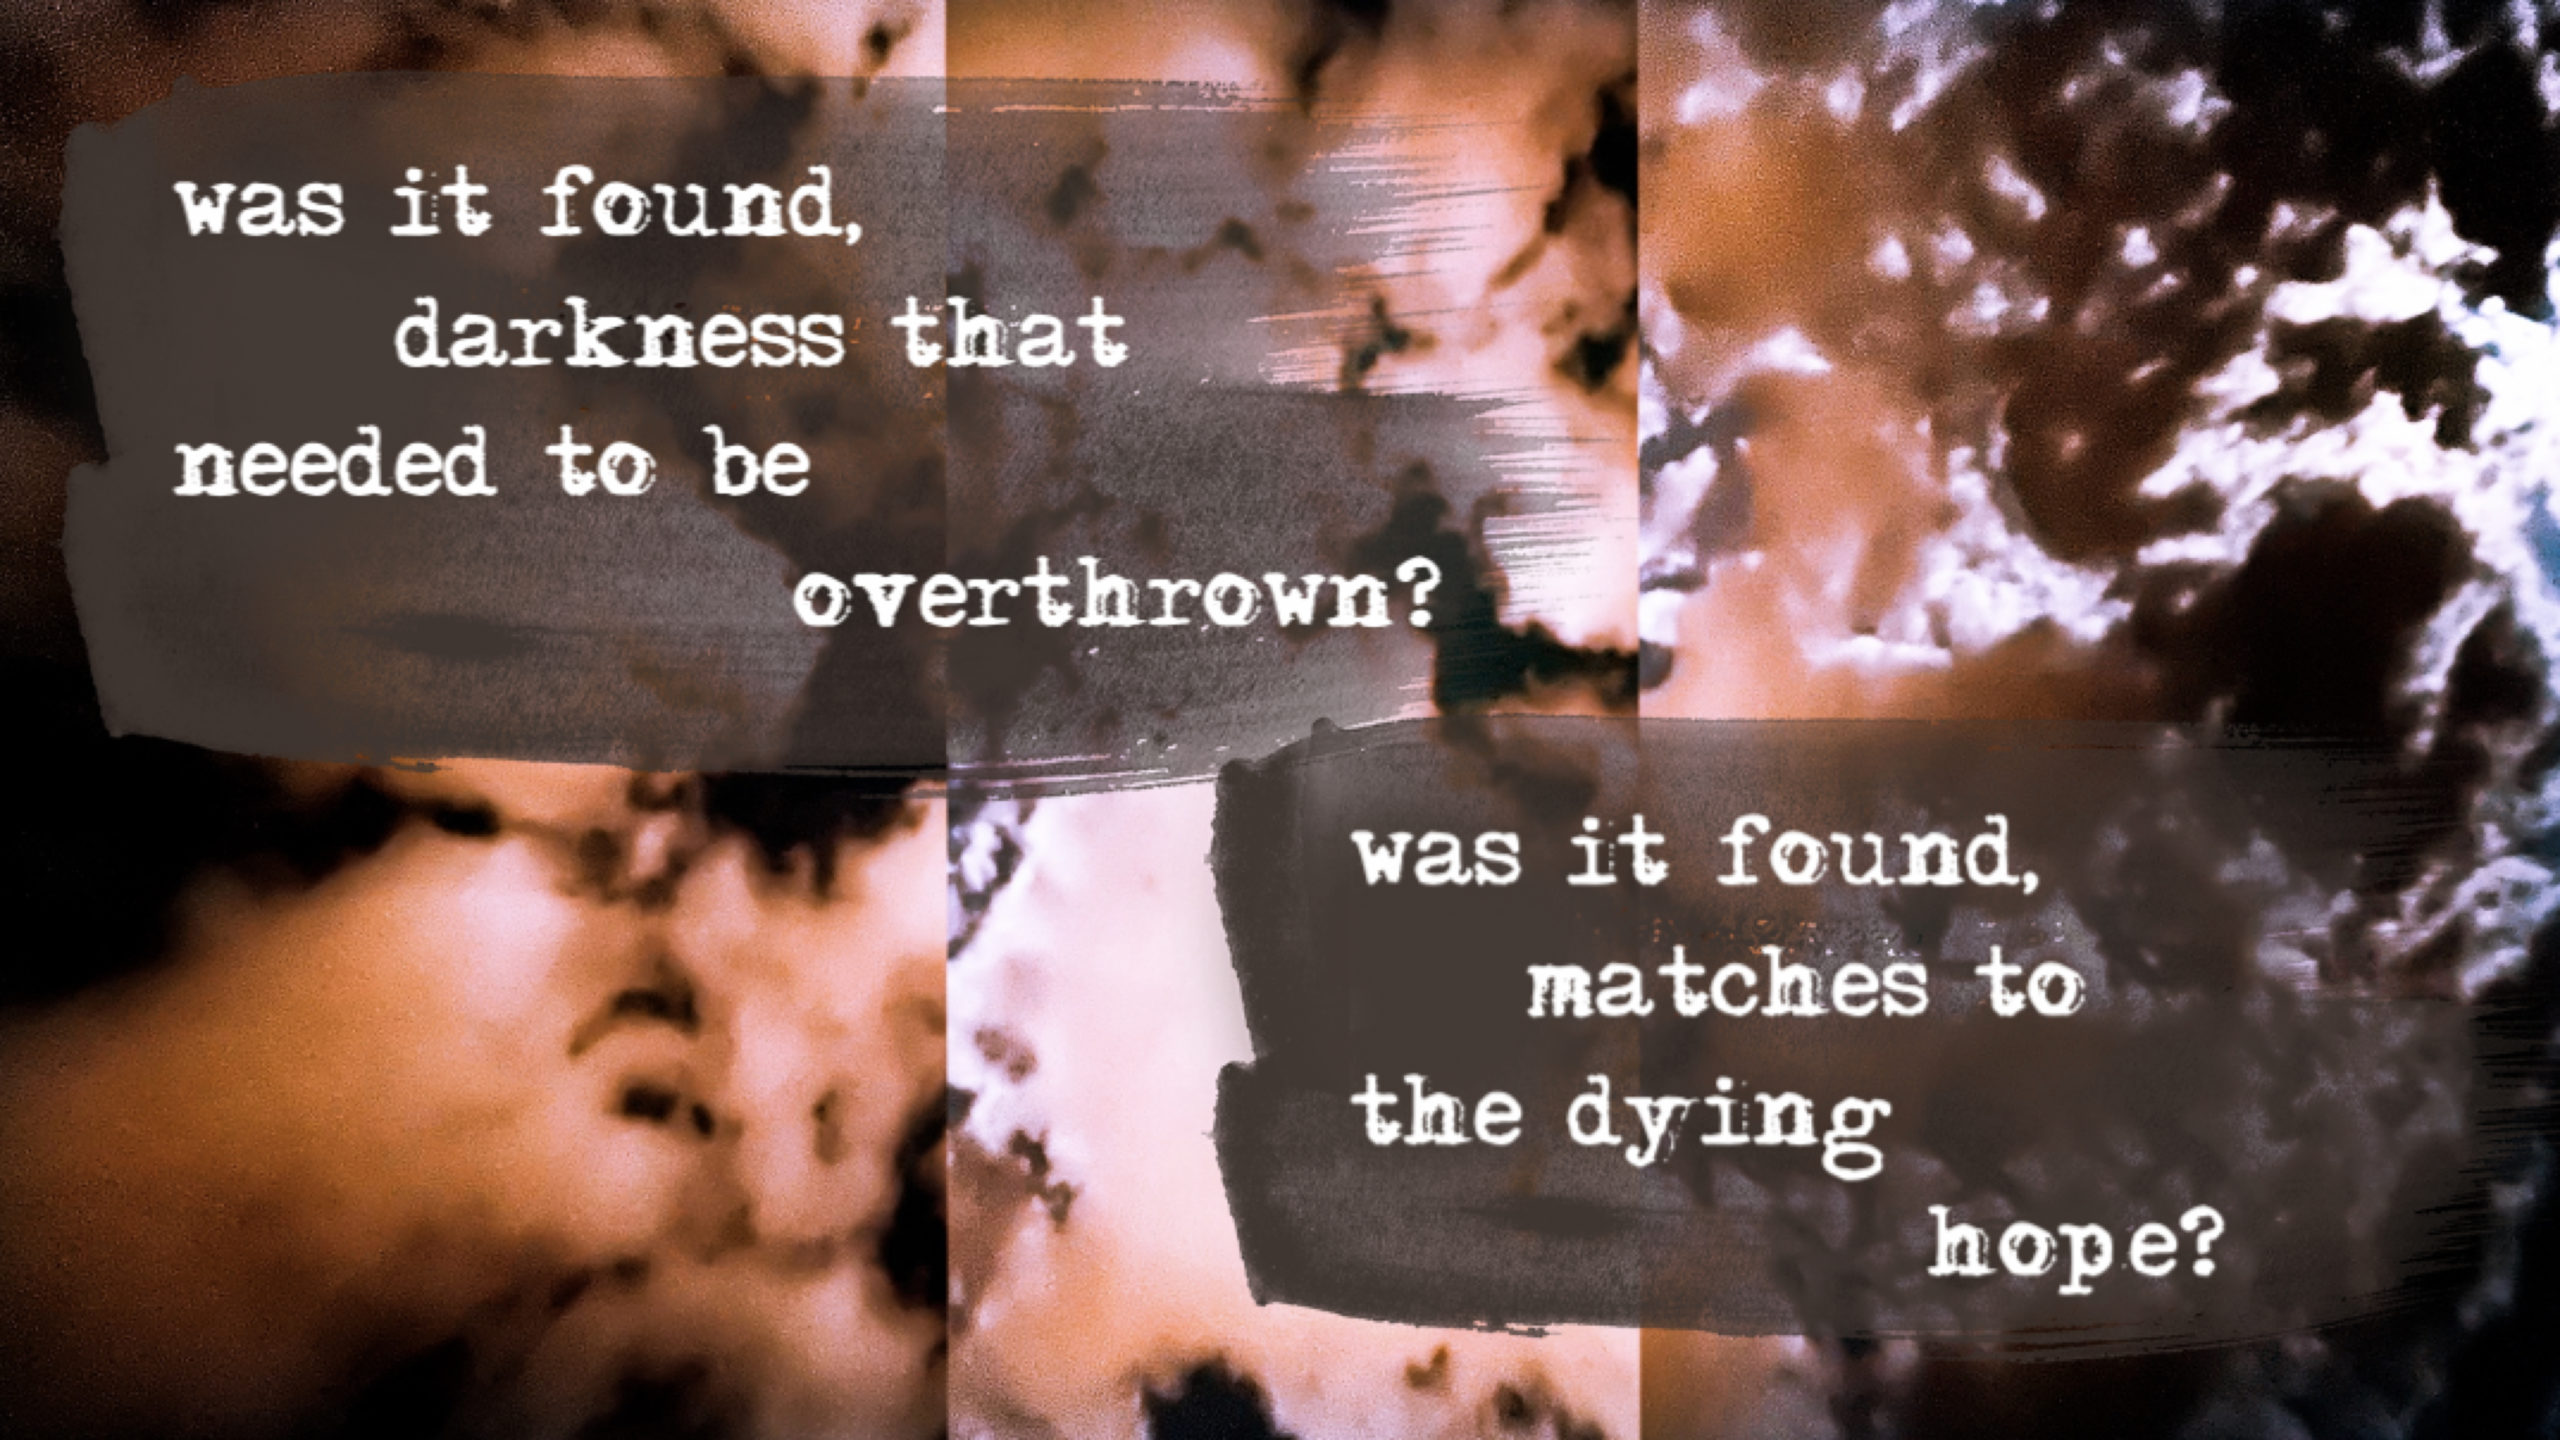 || was it found ||</p>
<p>was it found,<br />
darkness that<br />
needed to be overthrown?</p>
<p>was it found,<br />
matches to<br />
the dying hope?